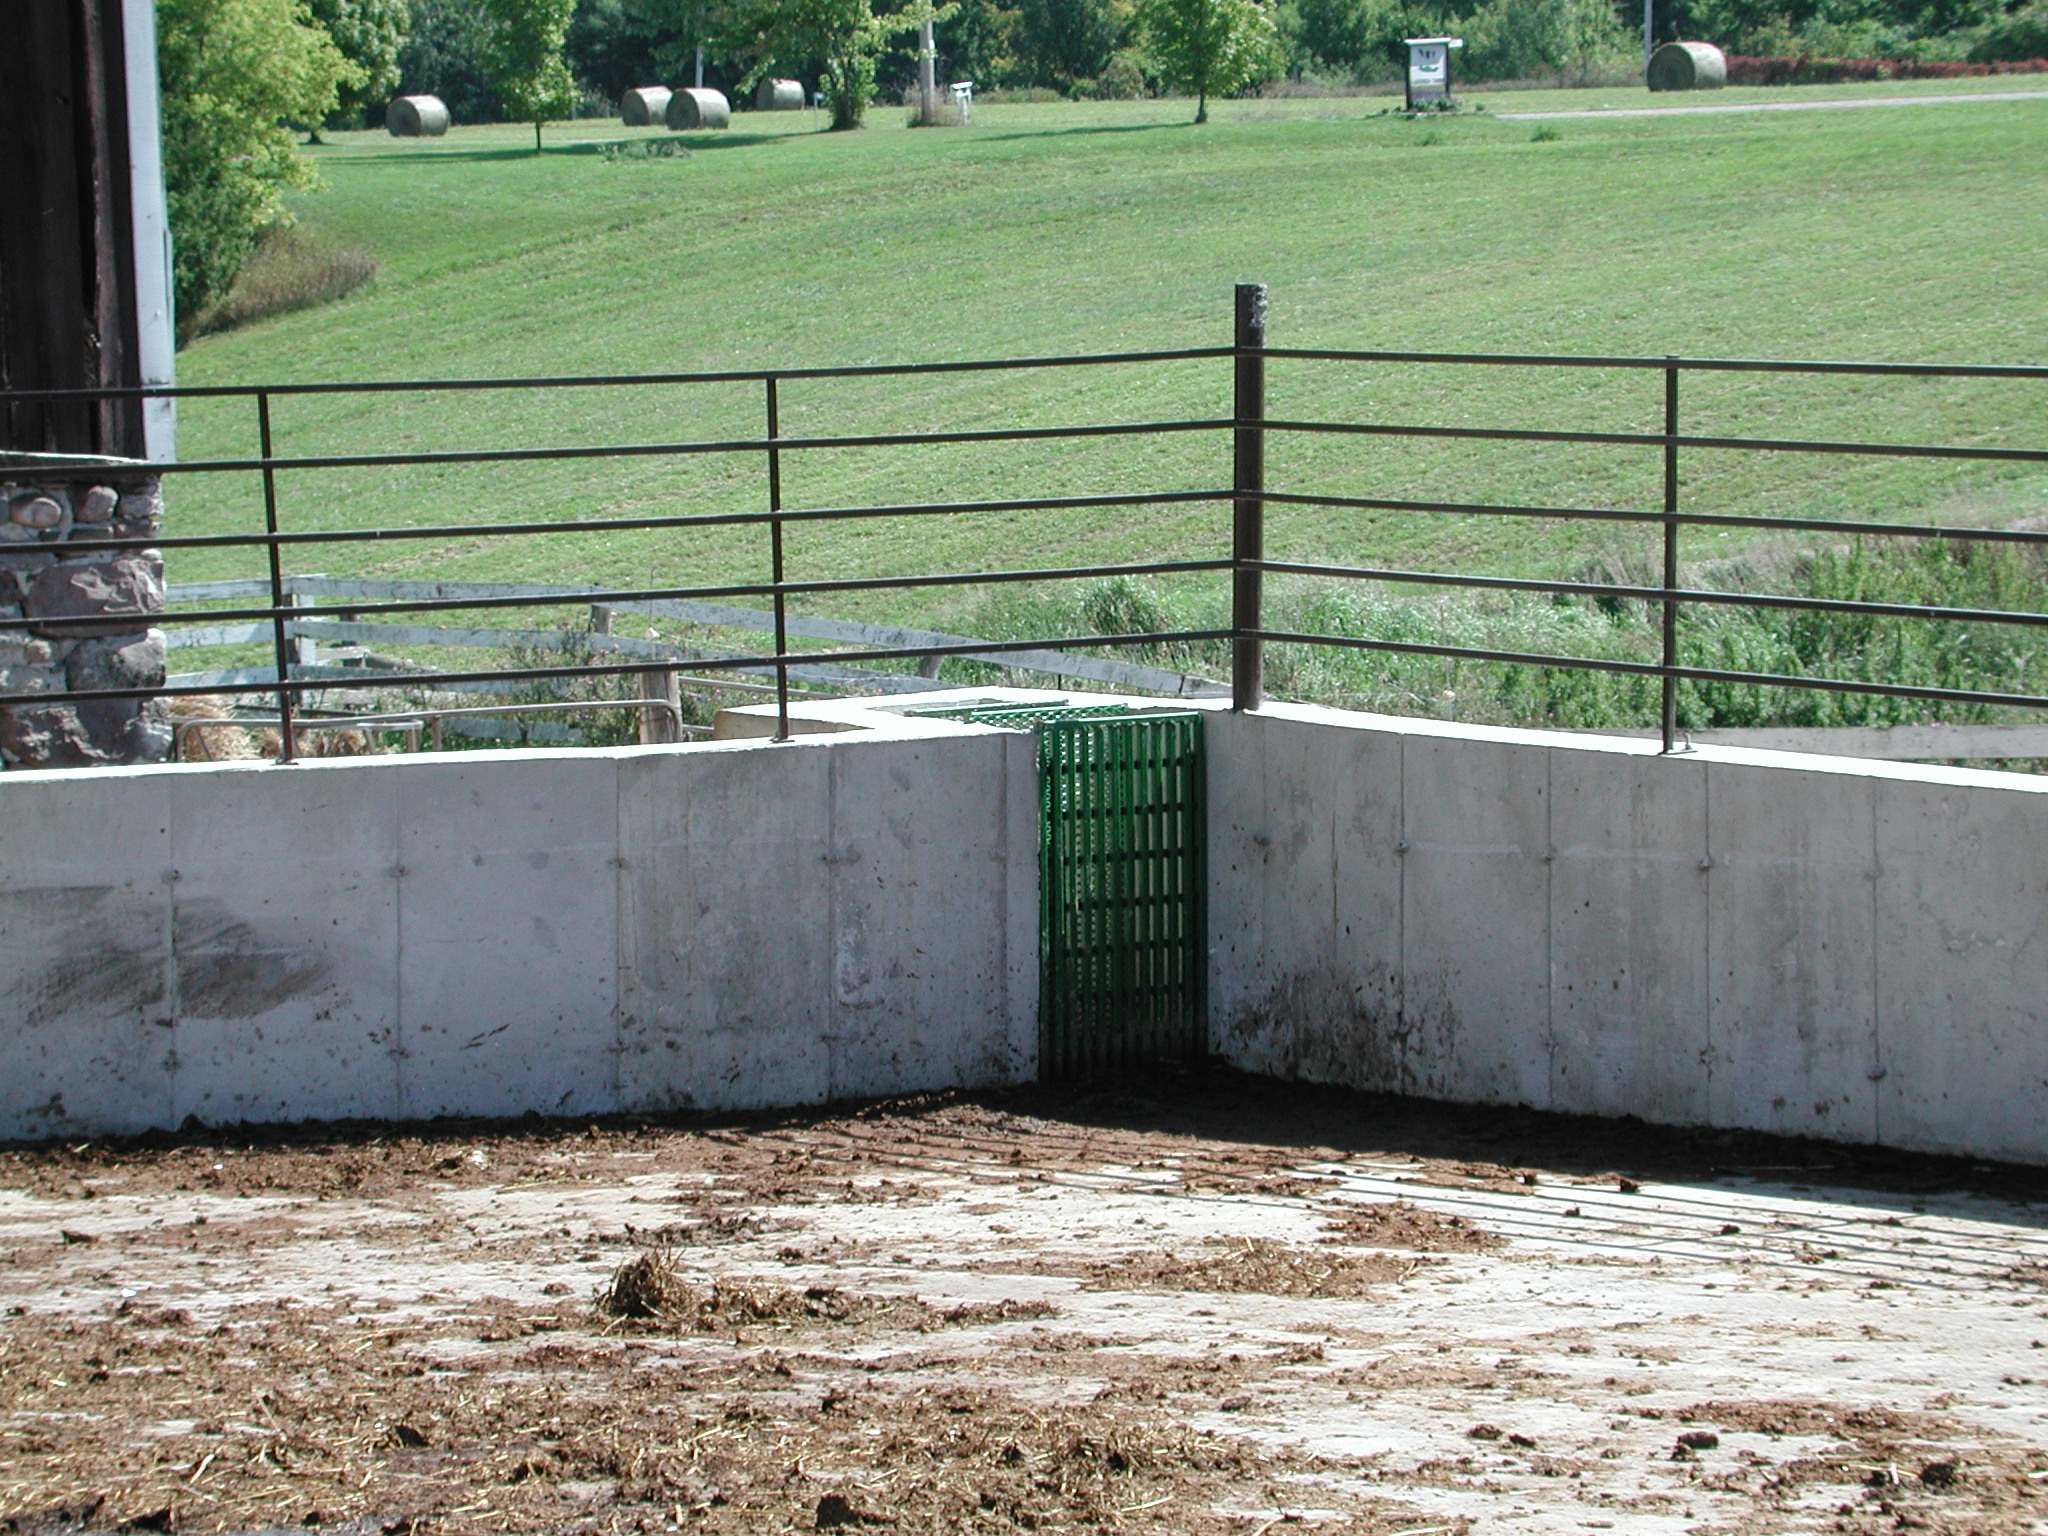 Picture showing the convergence to 2 cement walls, with fencing on top. A screen, placed in the corner of the 2 walls, limits the amount of solids reaching the holding tank and pump of a vegetated filter system.